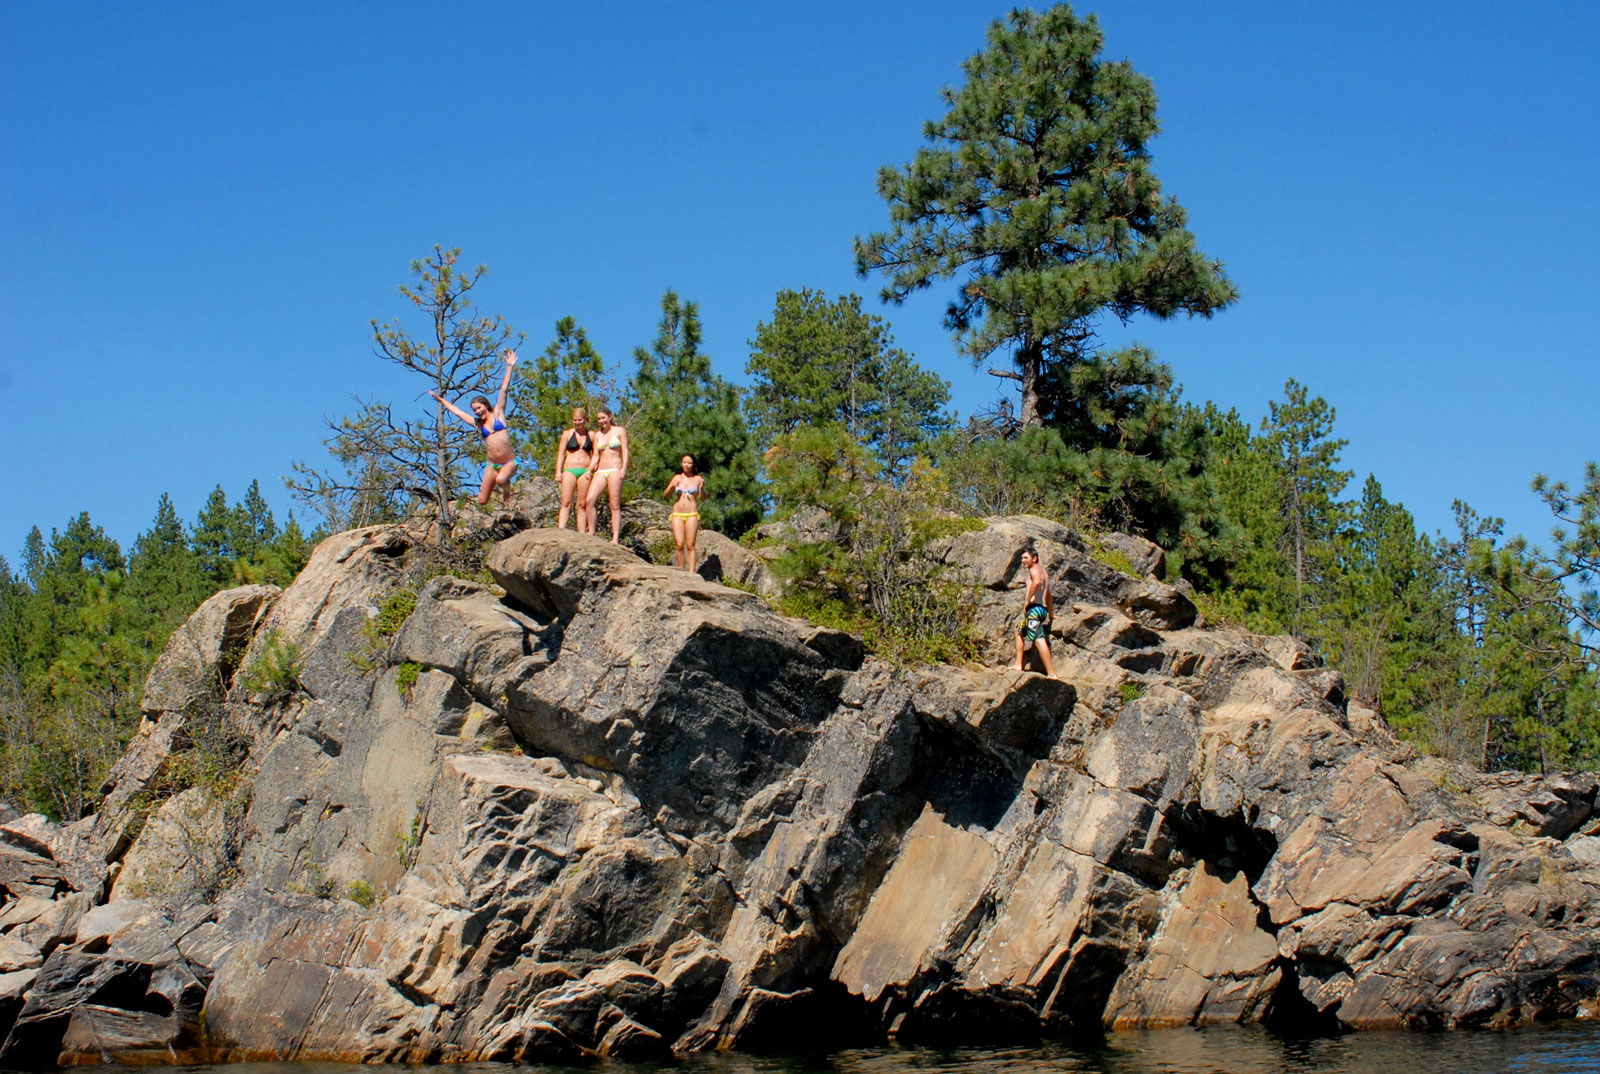 Cliff diving on Lake Coeur d'Alene | The Preserve at Gotham Bay